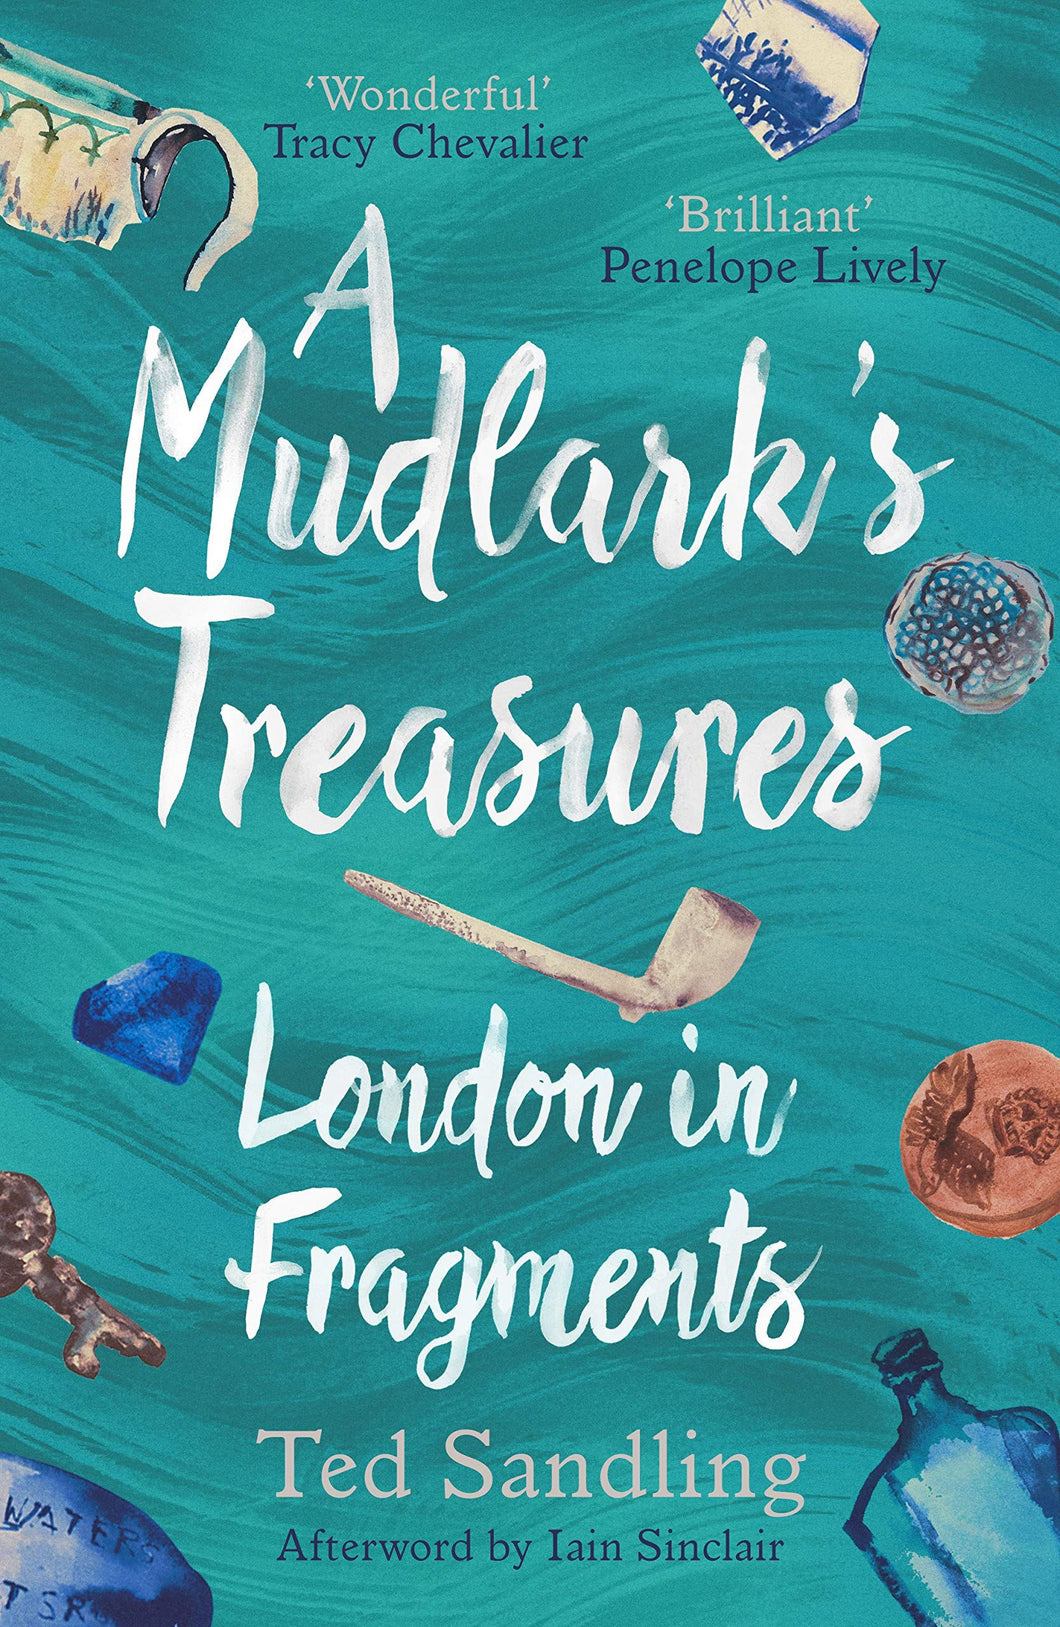 A Mudlark's Treasures: London in Fragments by Ted Sandling